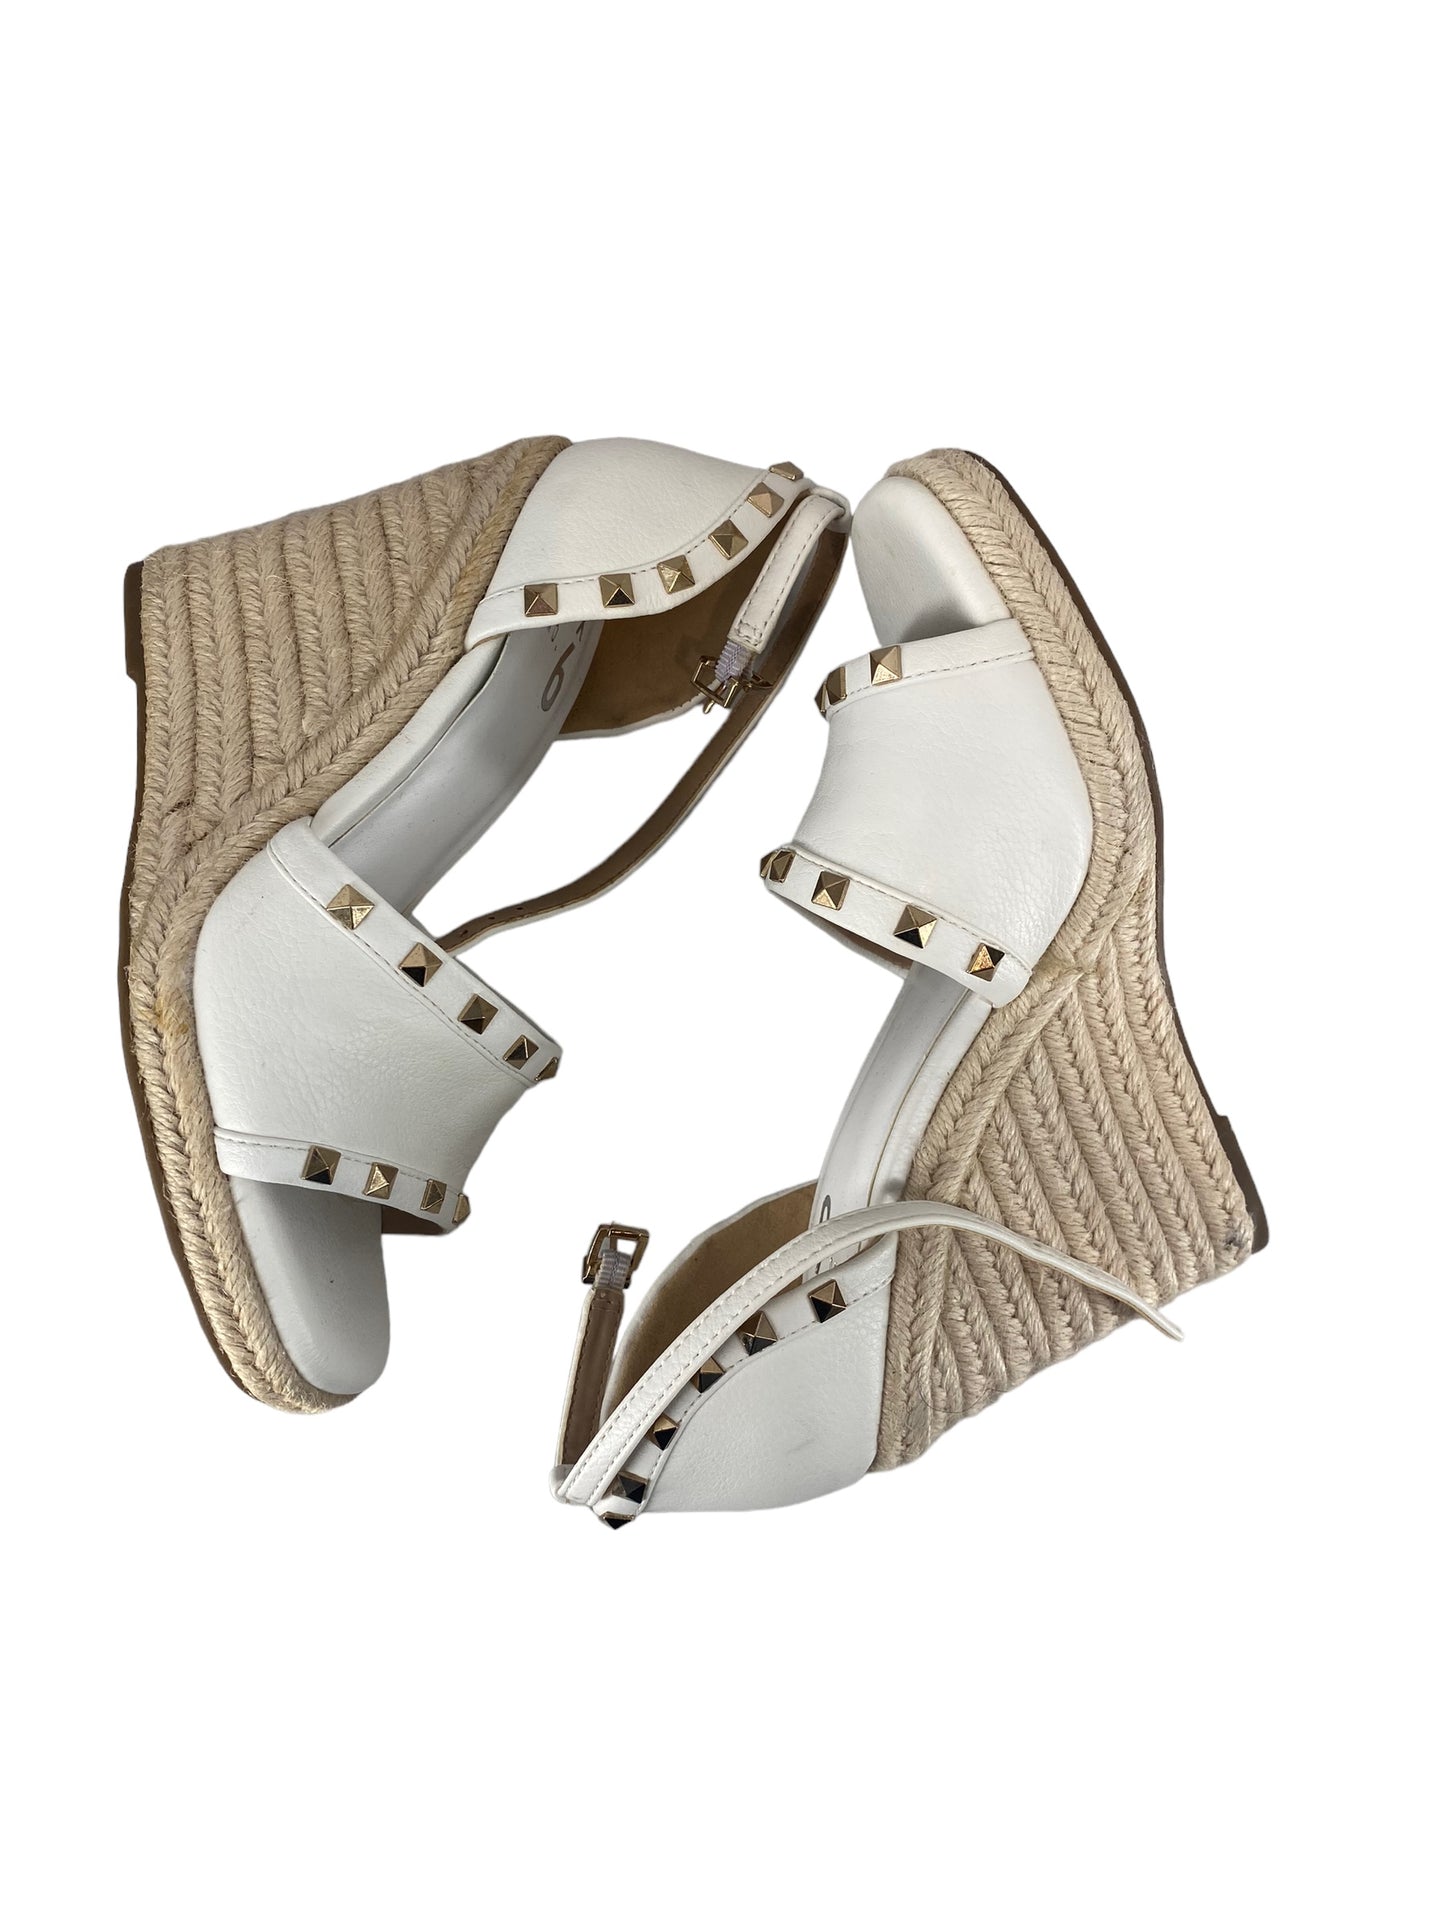 Sandals Heels Wedge By Mix No 6  Size: 6